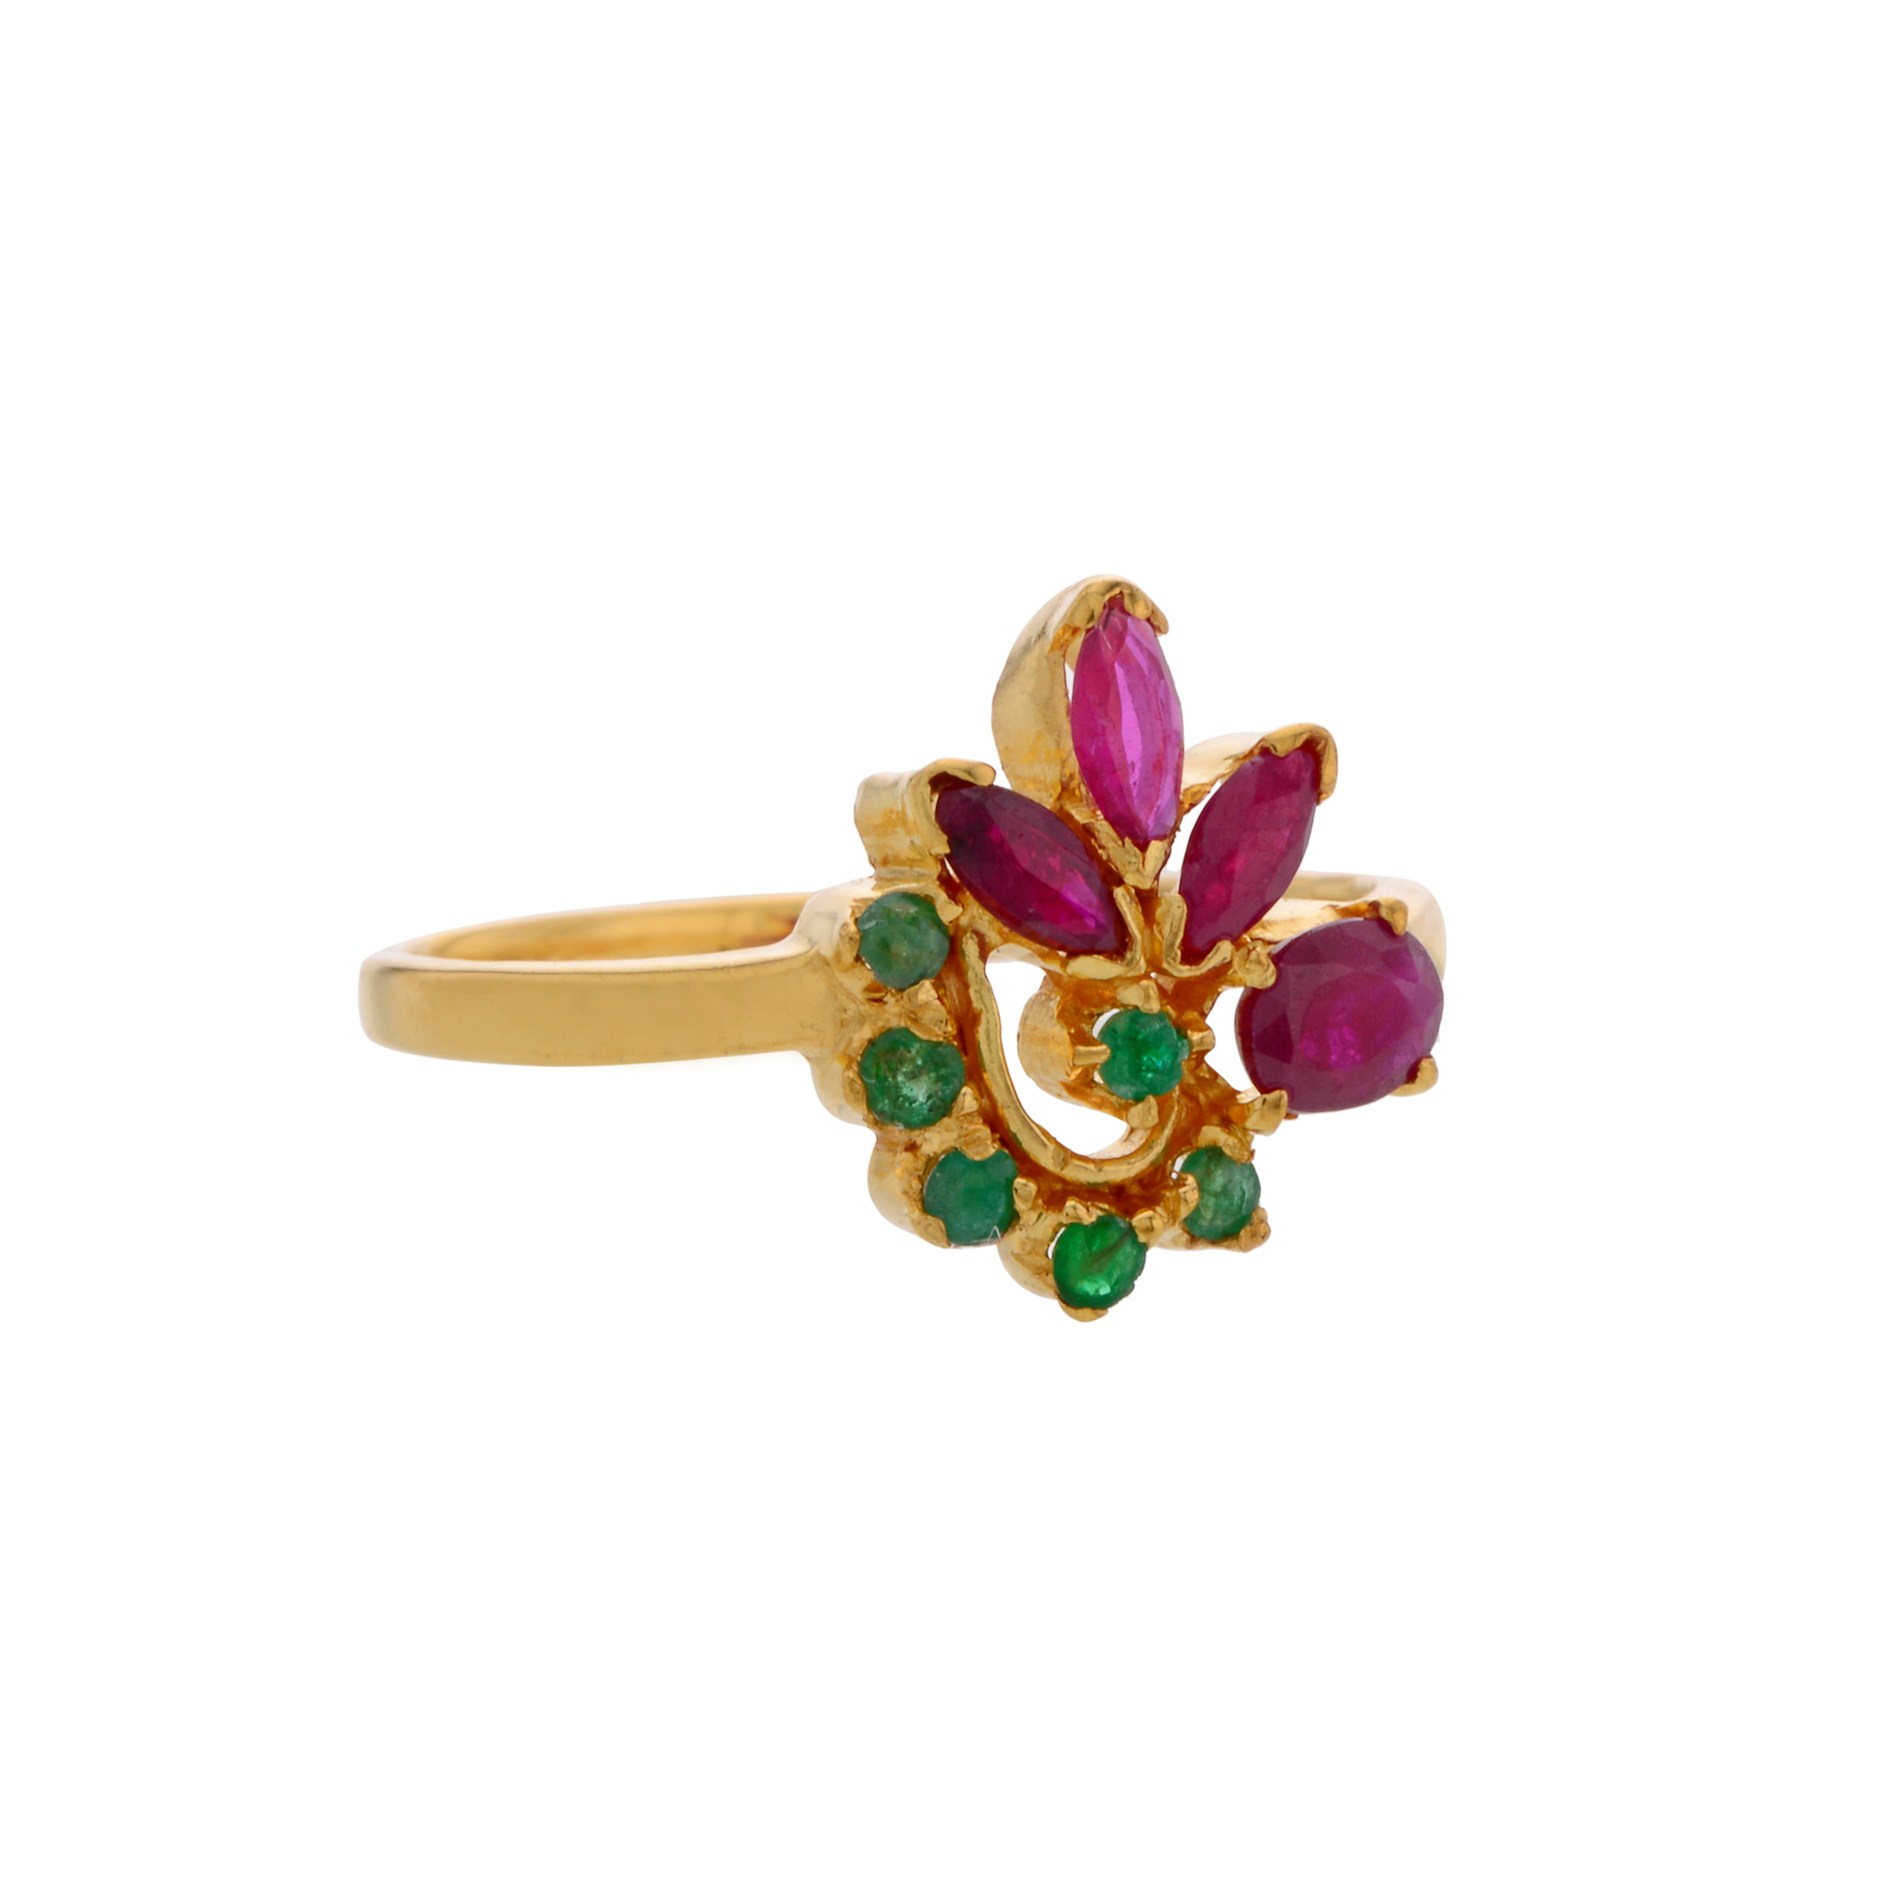 Vintage 10K Yellow Gold, Ruby and Emerald Ring - Larc Jewelers